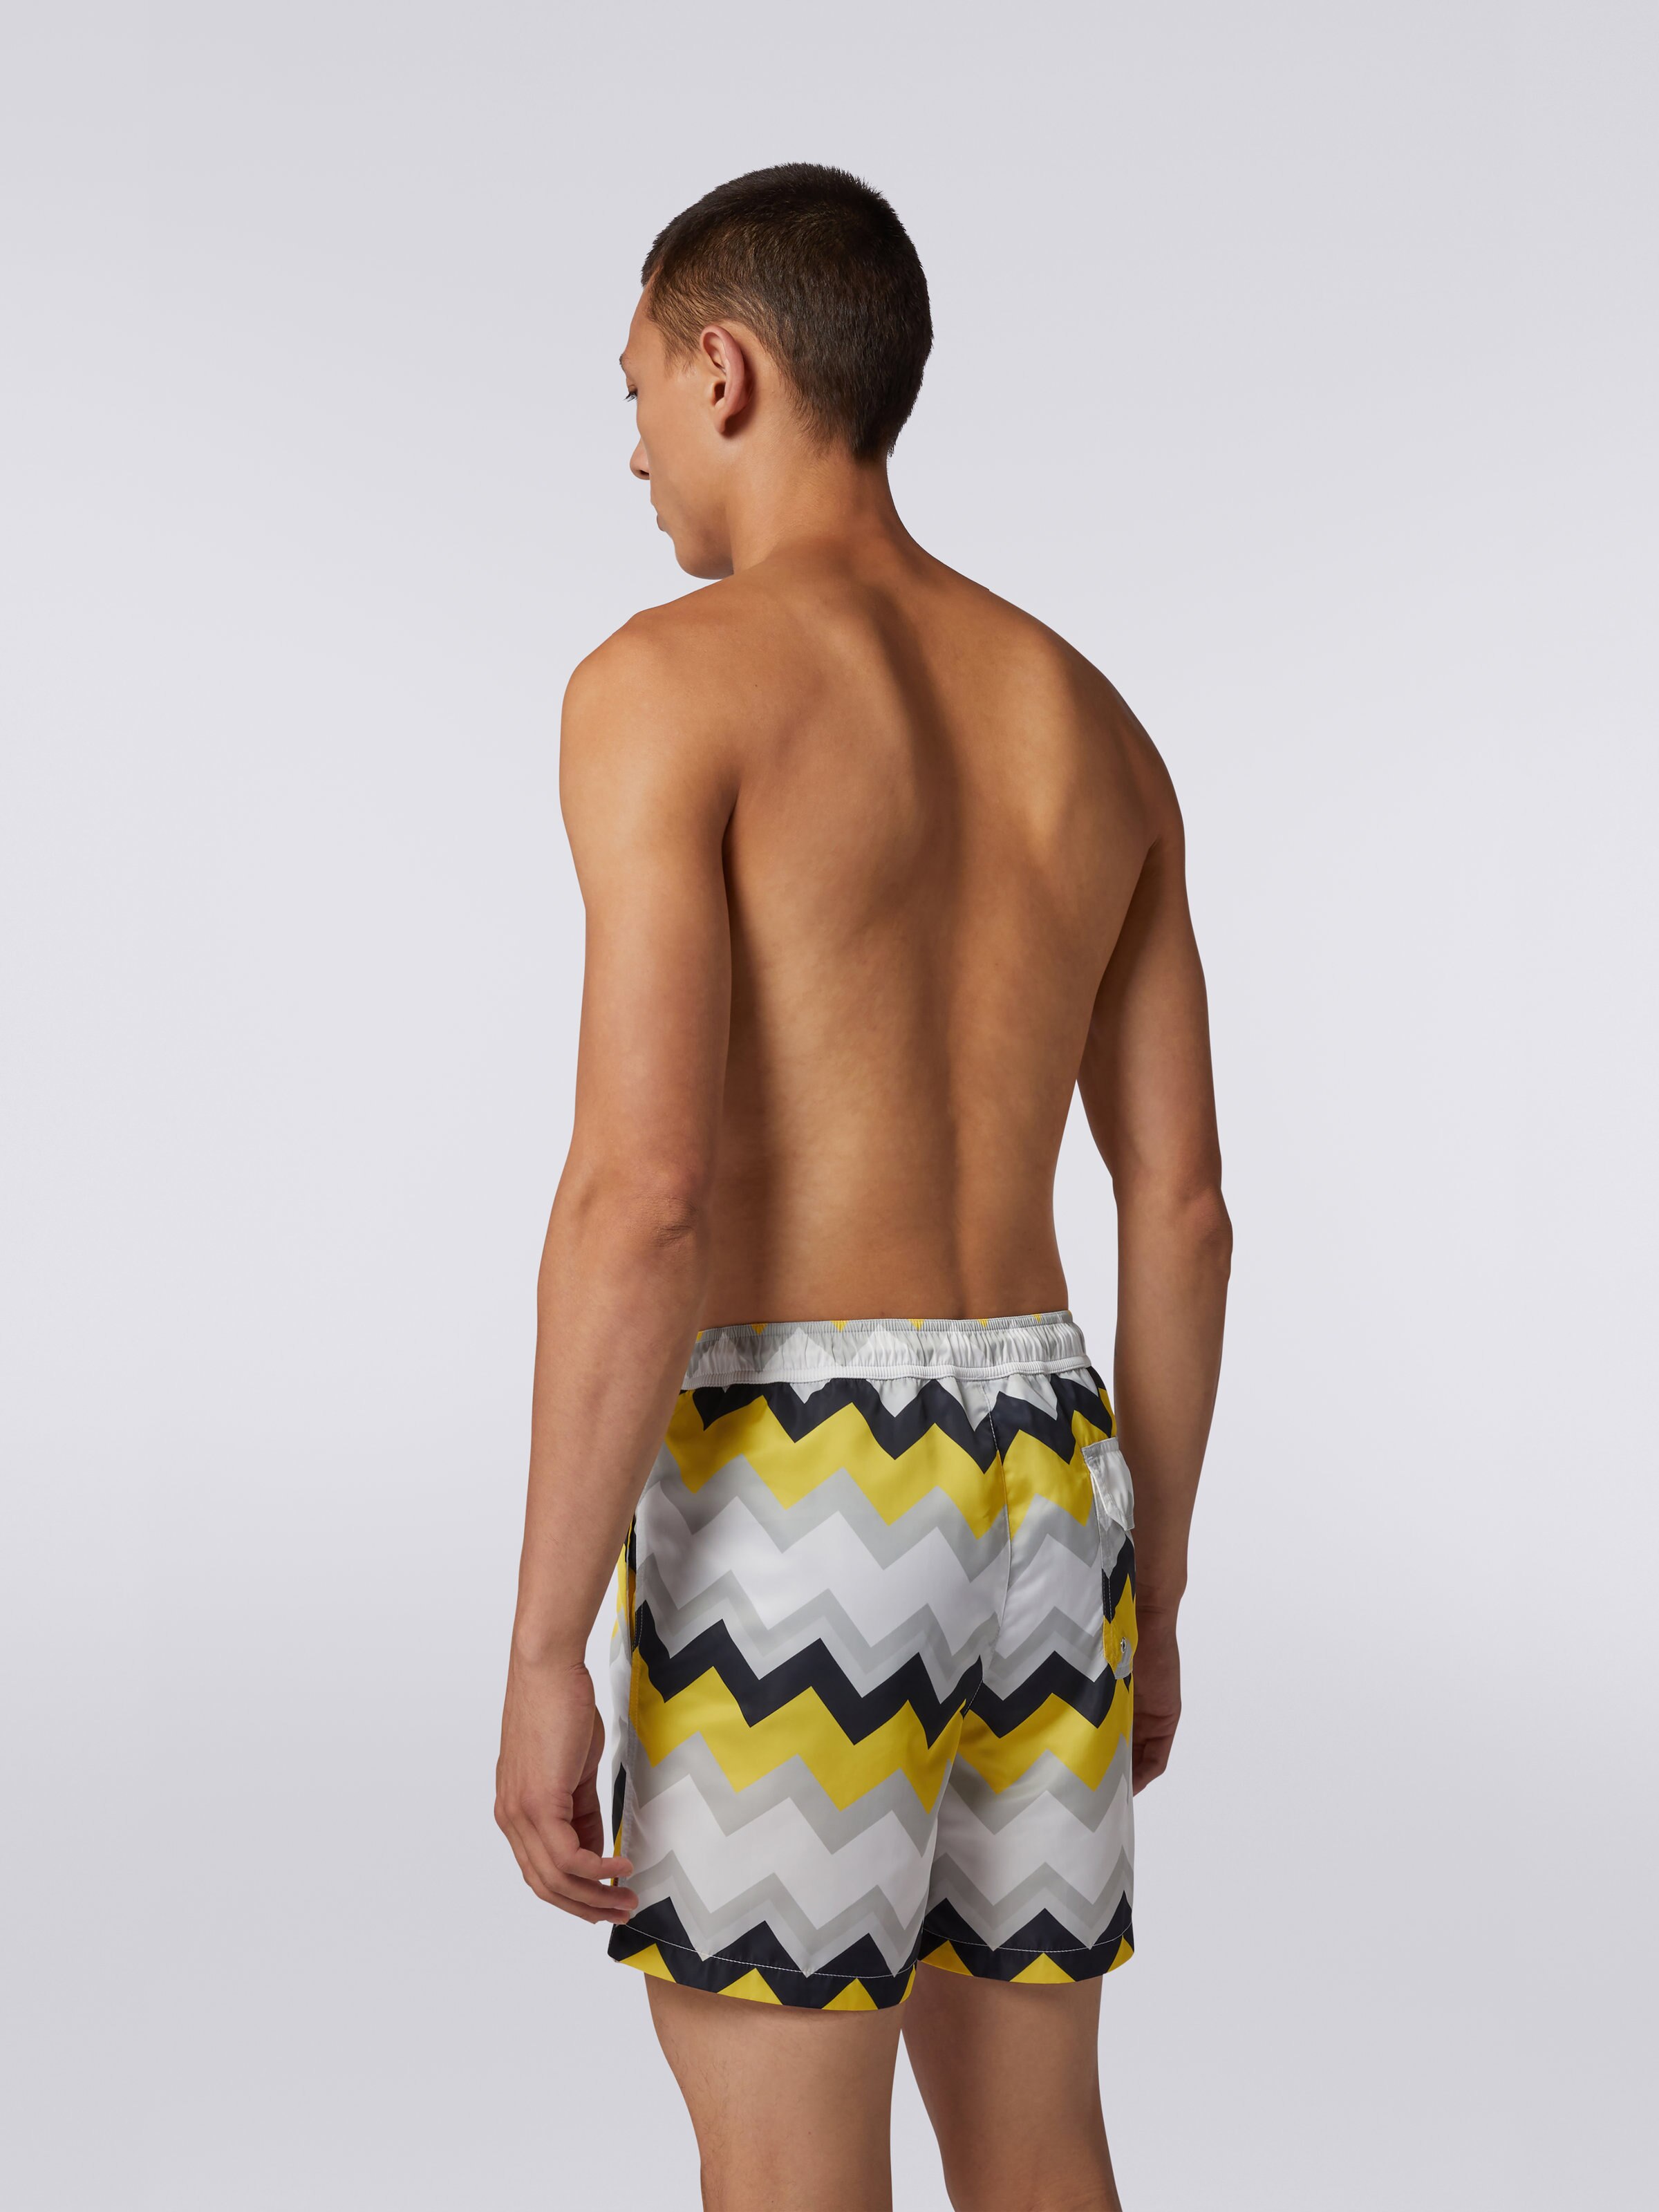 Nylon blend swimming trunks with large zigzag print, White, Yellow & Grey - 3